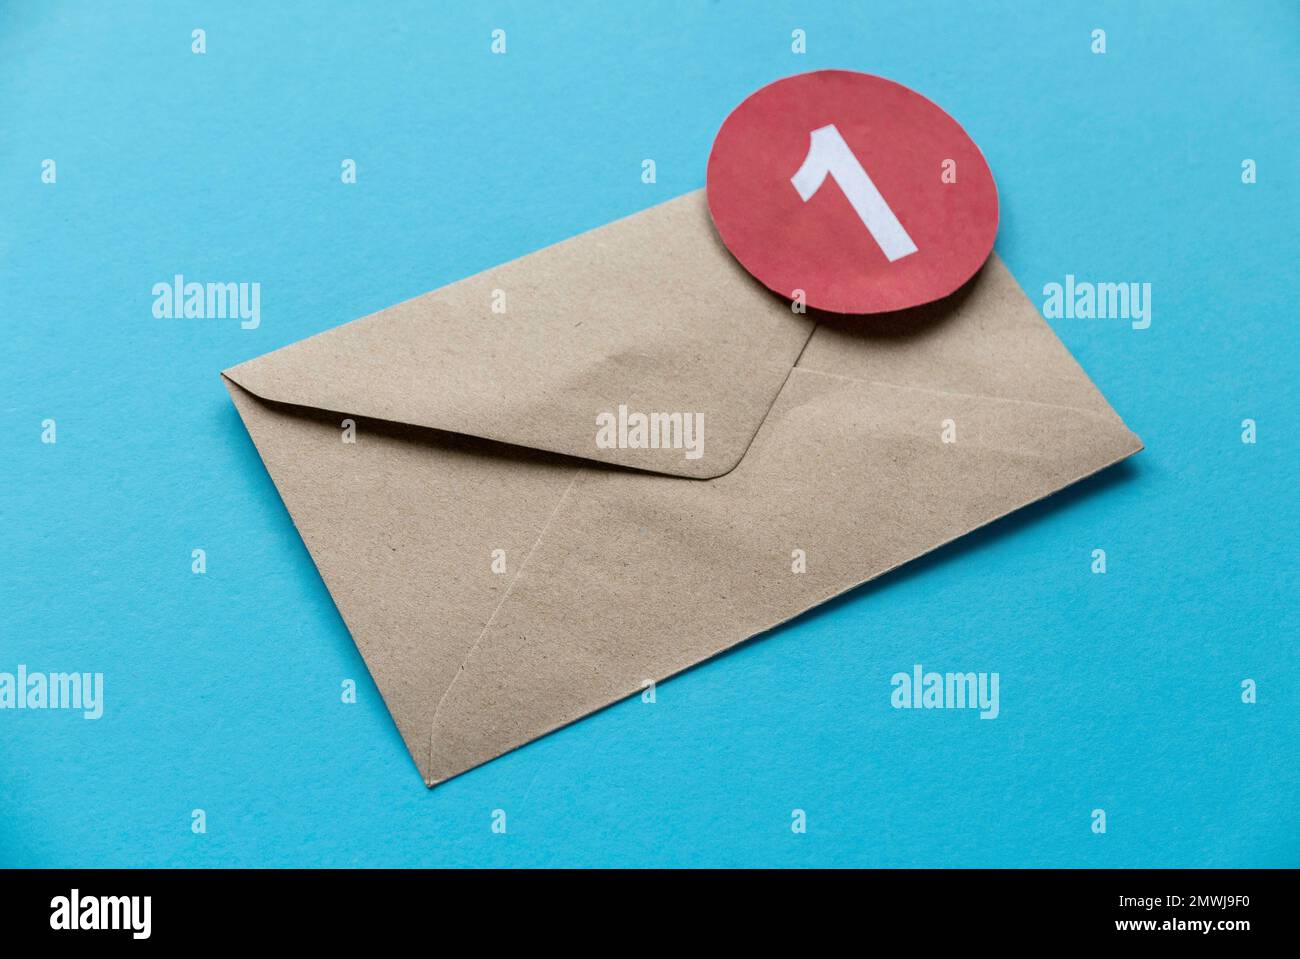 Concept of new email reminder or message alert. Brown craft envelope with a red symbol of notification on a blue background. Stock Photo